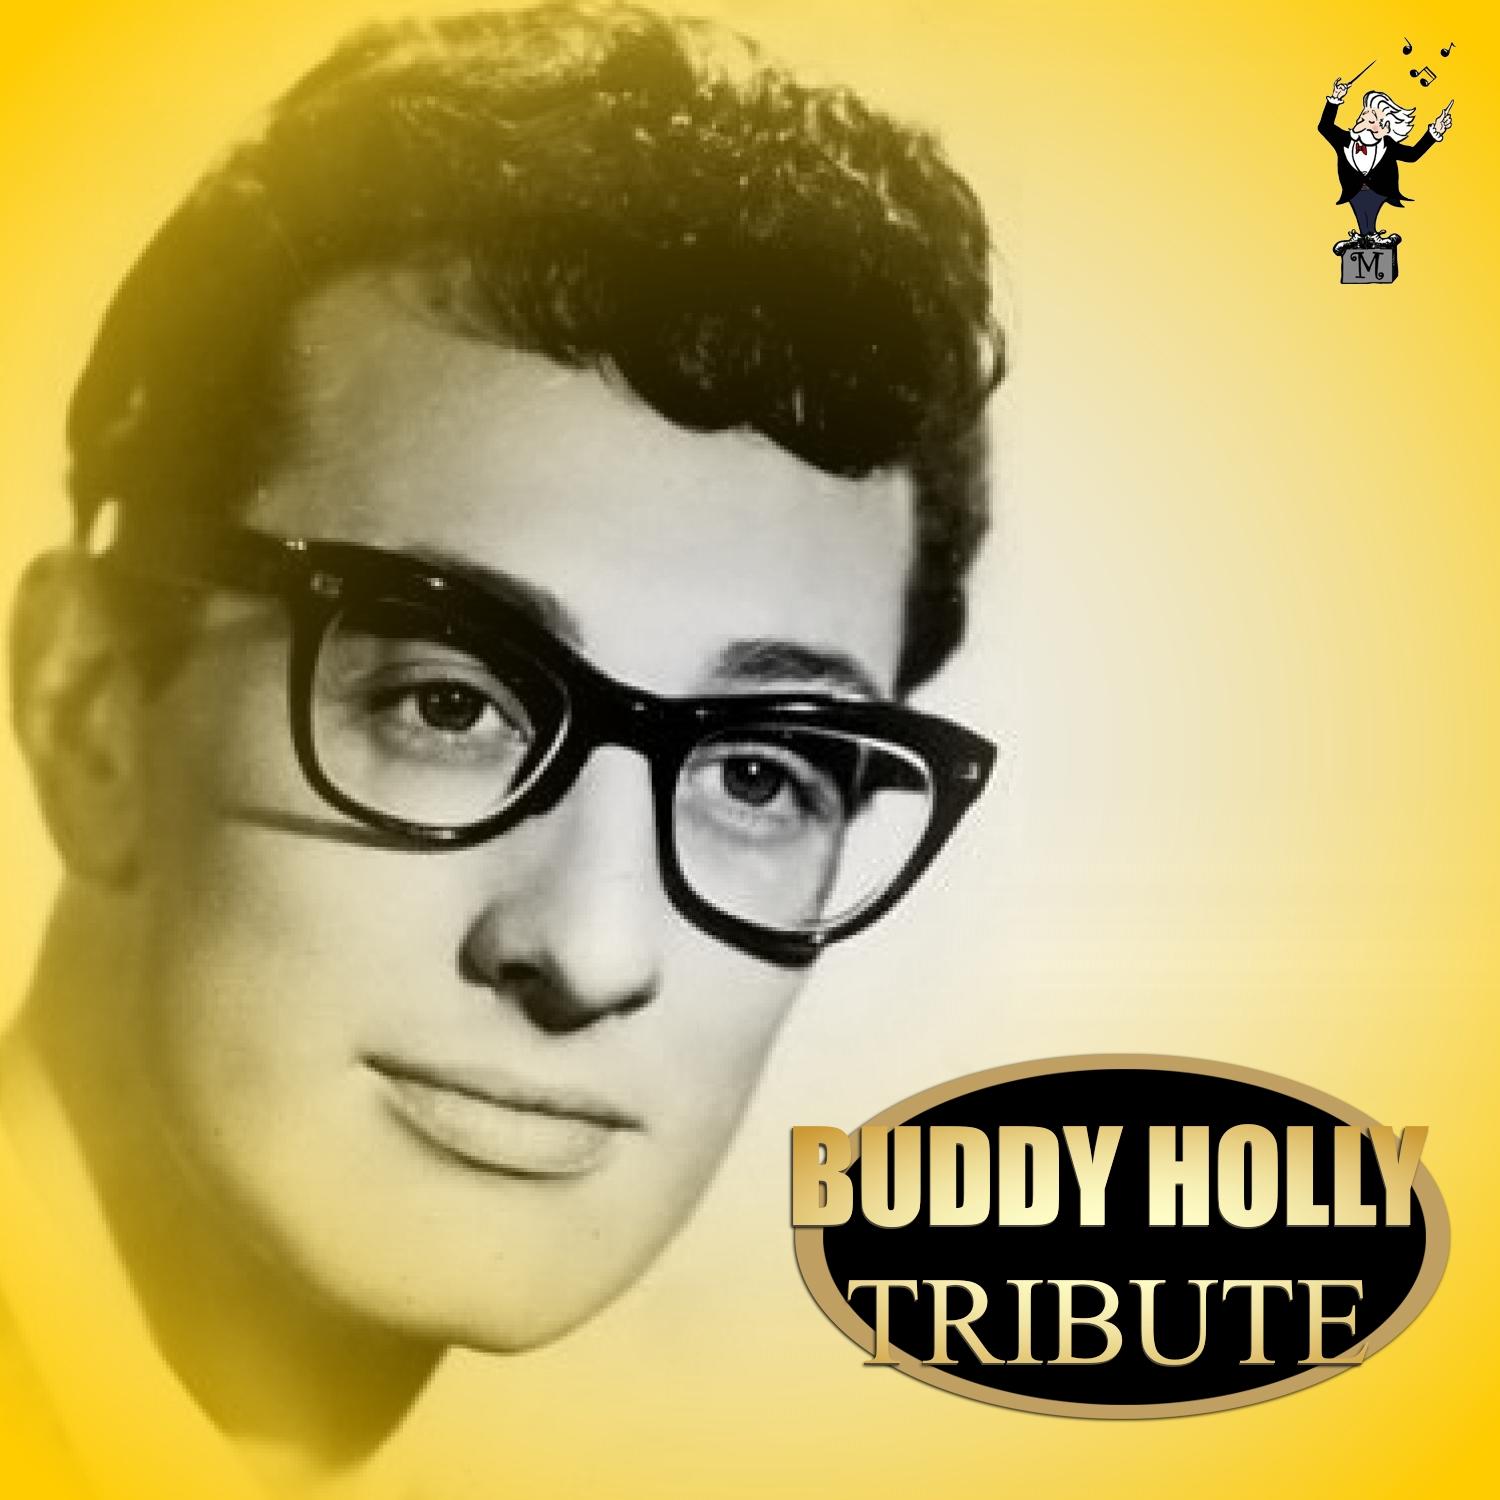 Interview with Buddy Holly & The Crickets